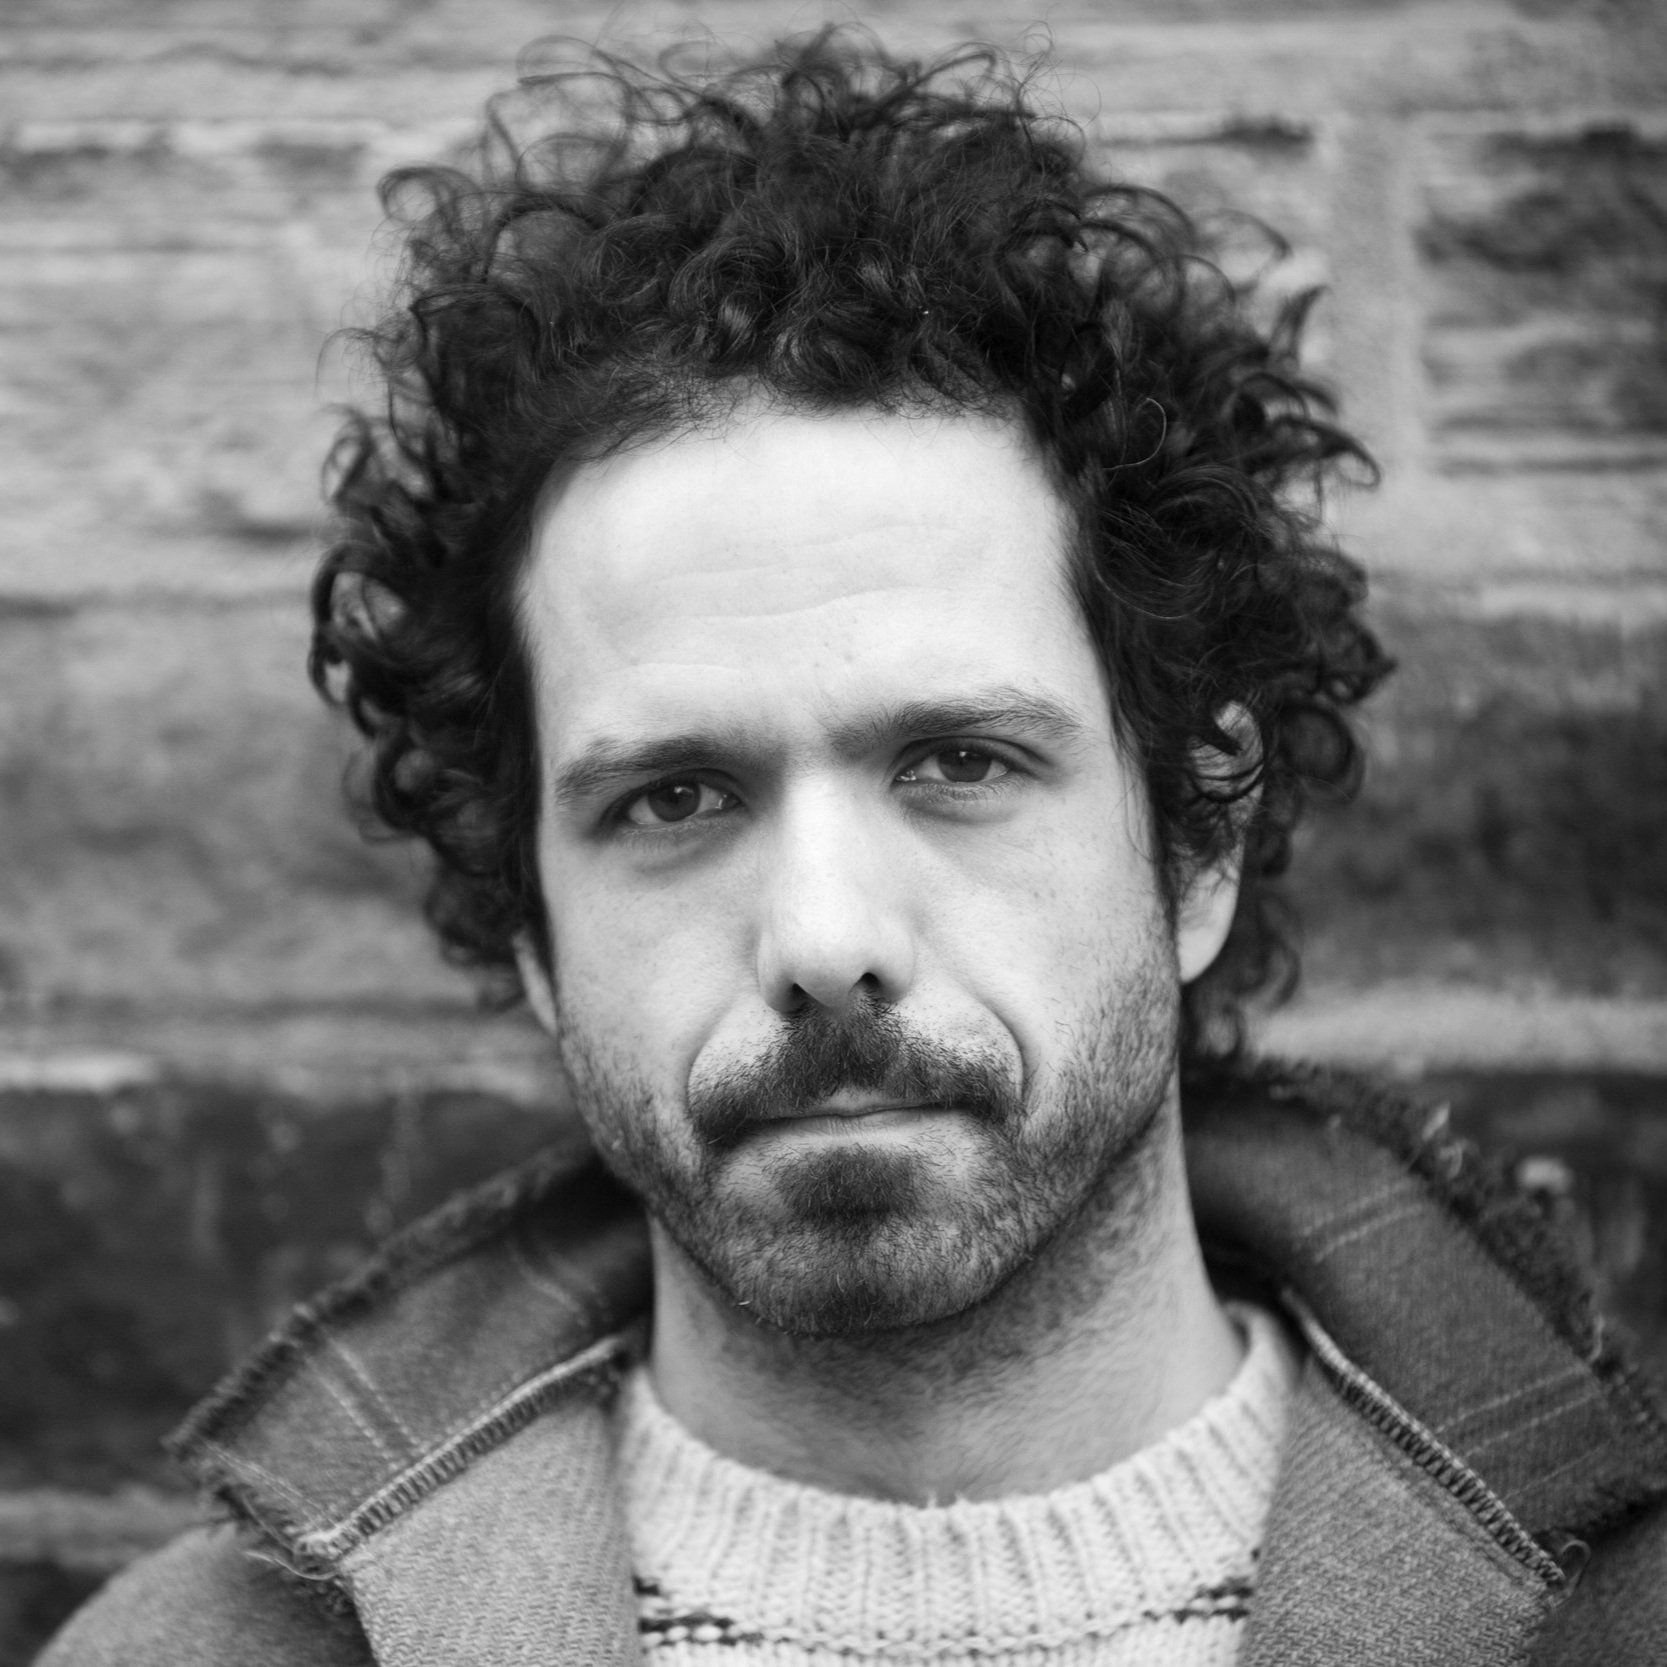   Zaffar Kunial  lives in Hebden Bridge, West Yorkshire, and was born in Birmingham. His debut collection,  Us , was shortlisted for a number of prizes, including the T. S. Eliot Prize.  England’s Green  is his second book. 